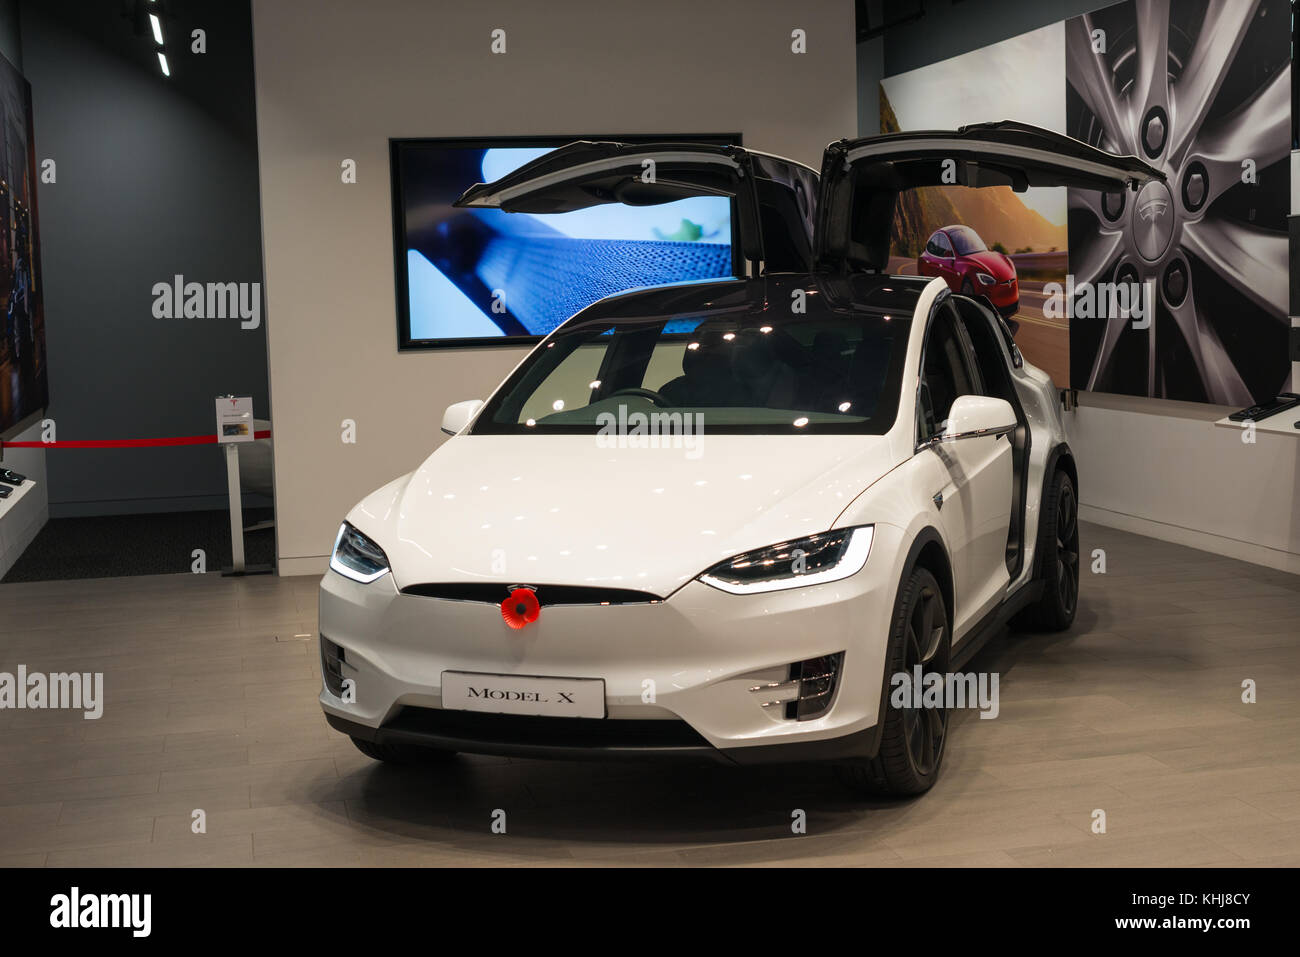 The Tesla Model X Electric car at the showroom in the Grand Arcade shopping Mall, Cambridge, England, UK. Stock Photo